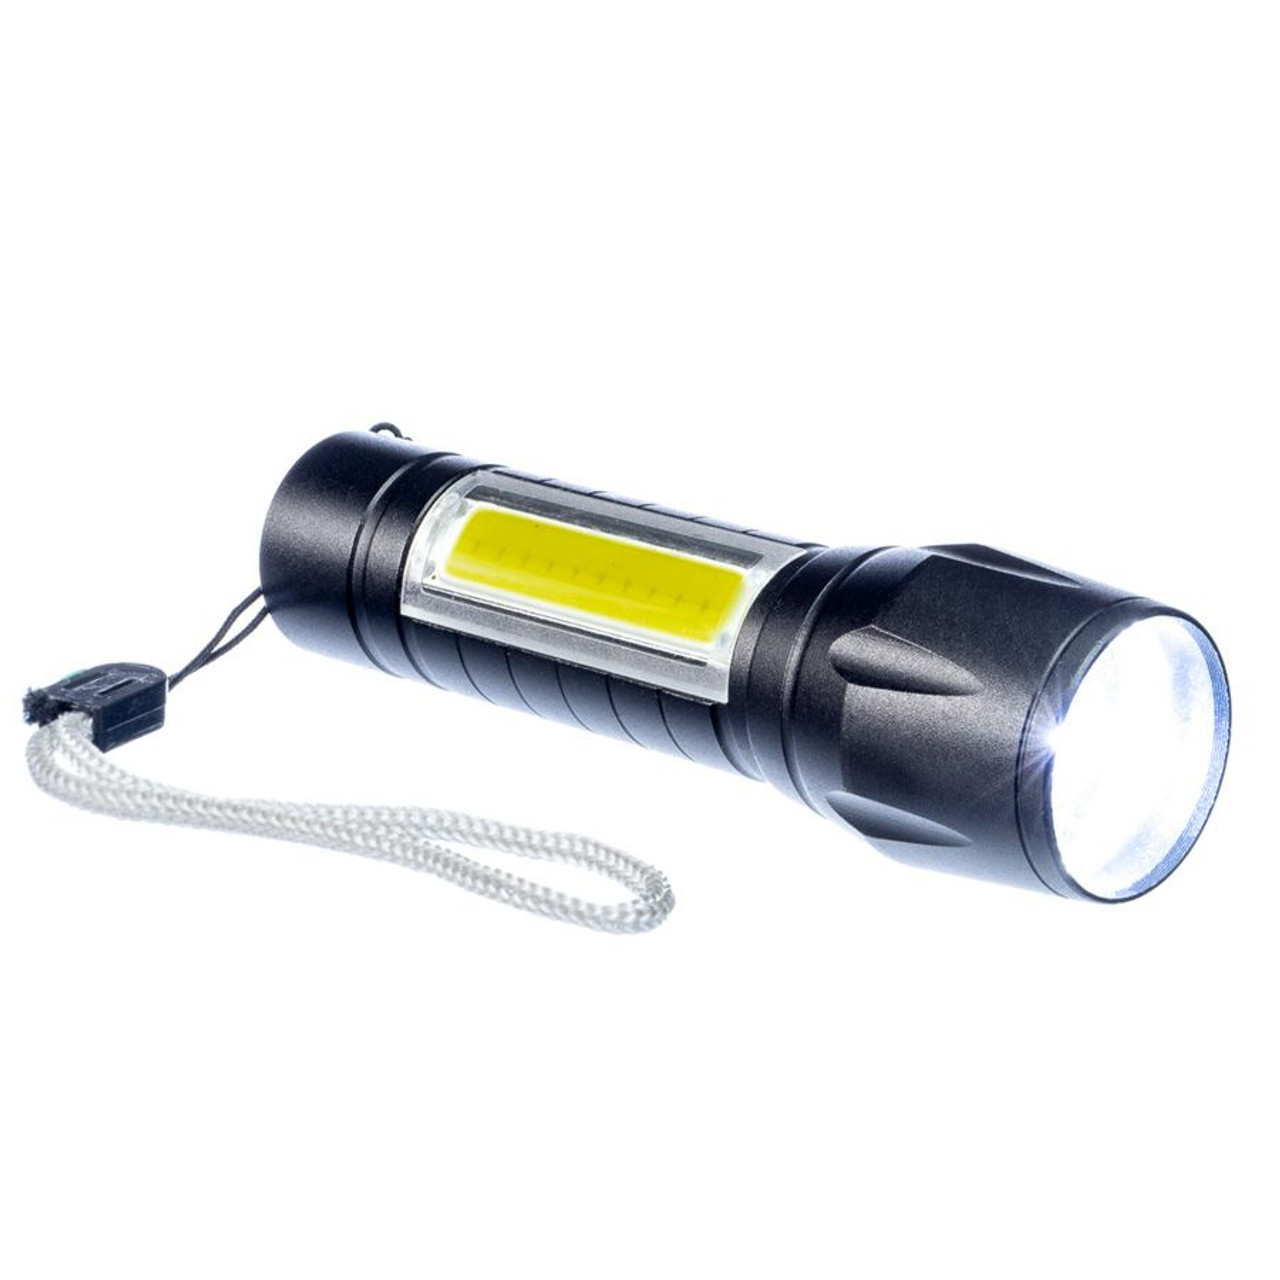 https://cdn11.bigcommerce.com/s-tumf4kk1l4/images/stencil/1280x1280/products/4014/7386/rechargeable-flashlight-usb-cable-included-500-lumen-adjustable-beam-side-light-23__57706.1697230826.jpg?c=1?imbypass=on